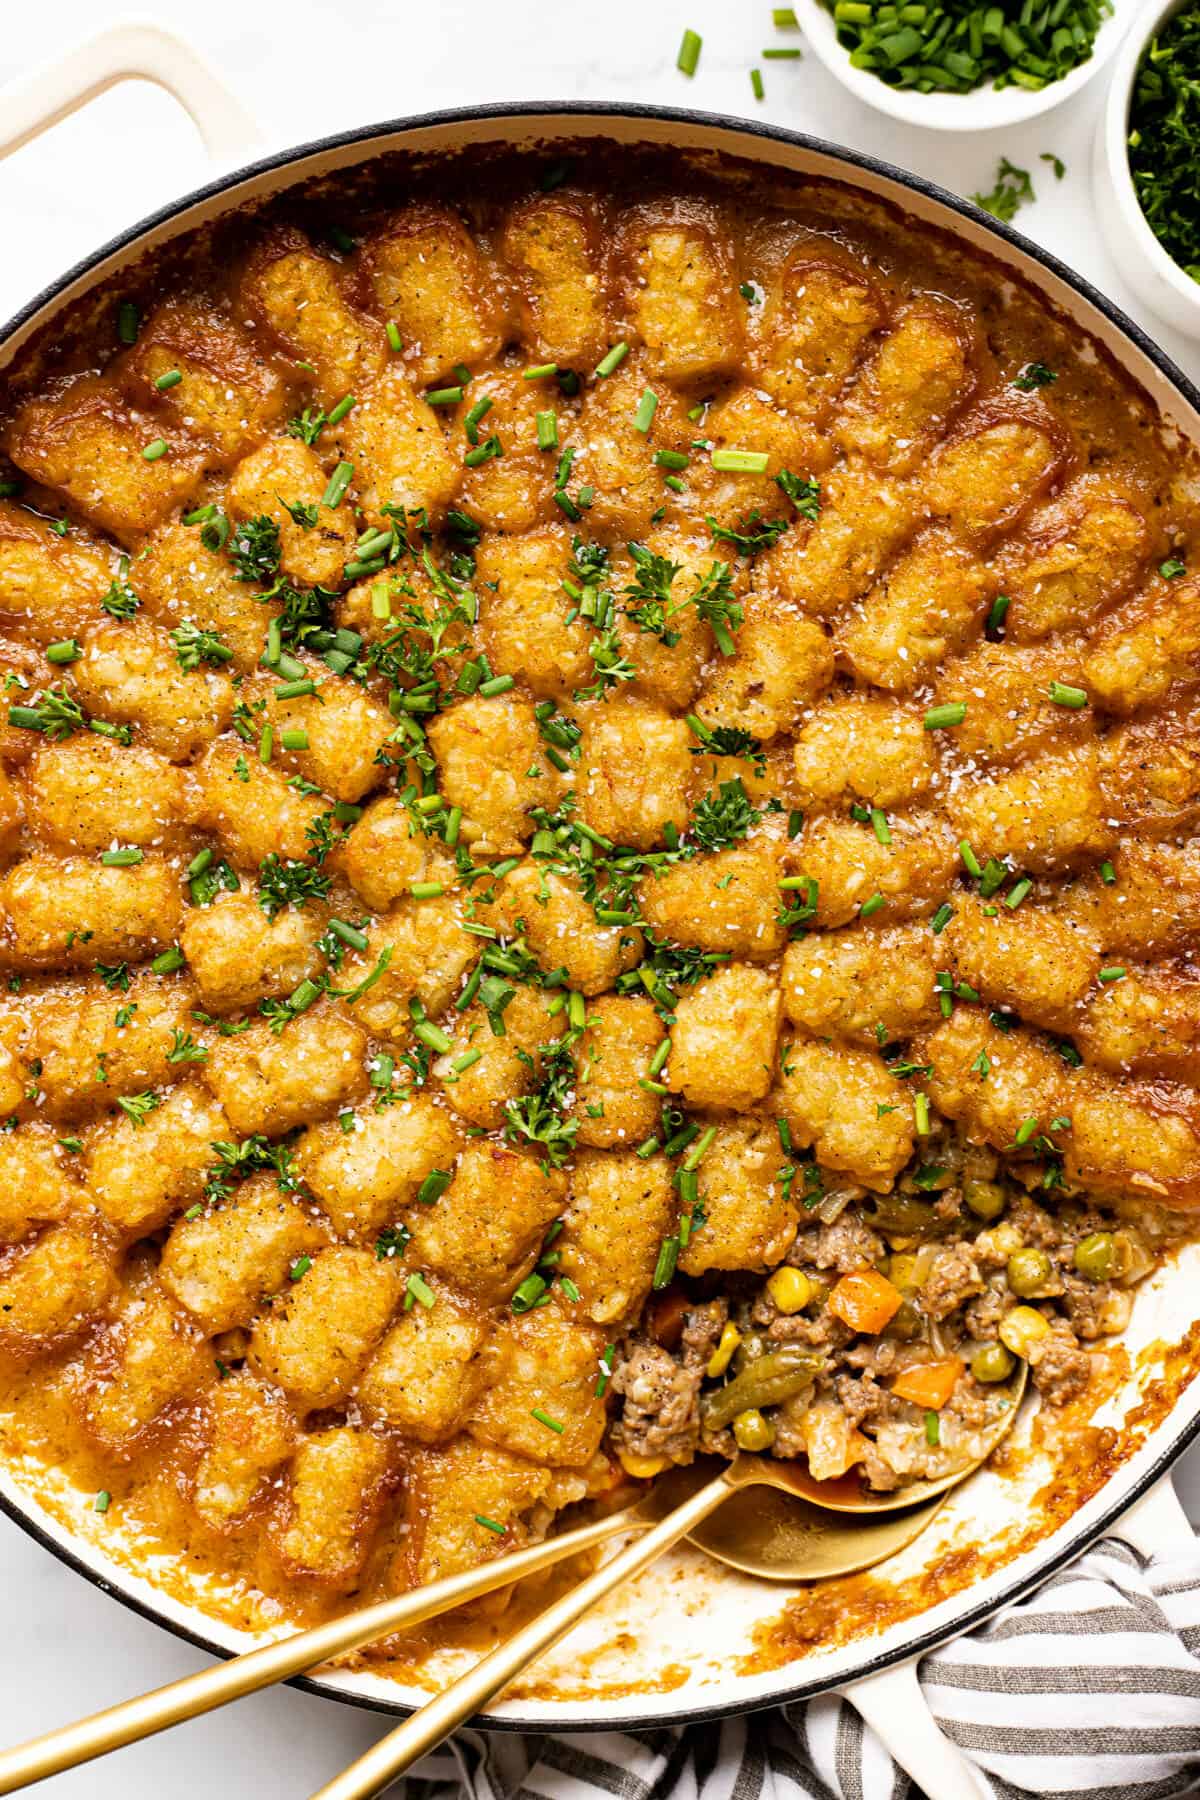 Large white pan filled with tater tot casserole garnished with chives